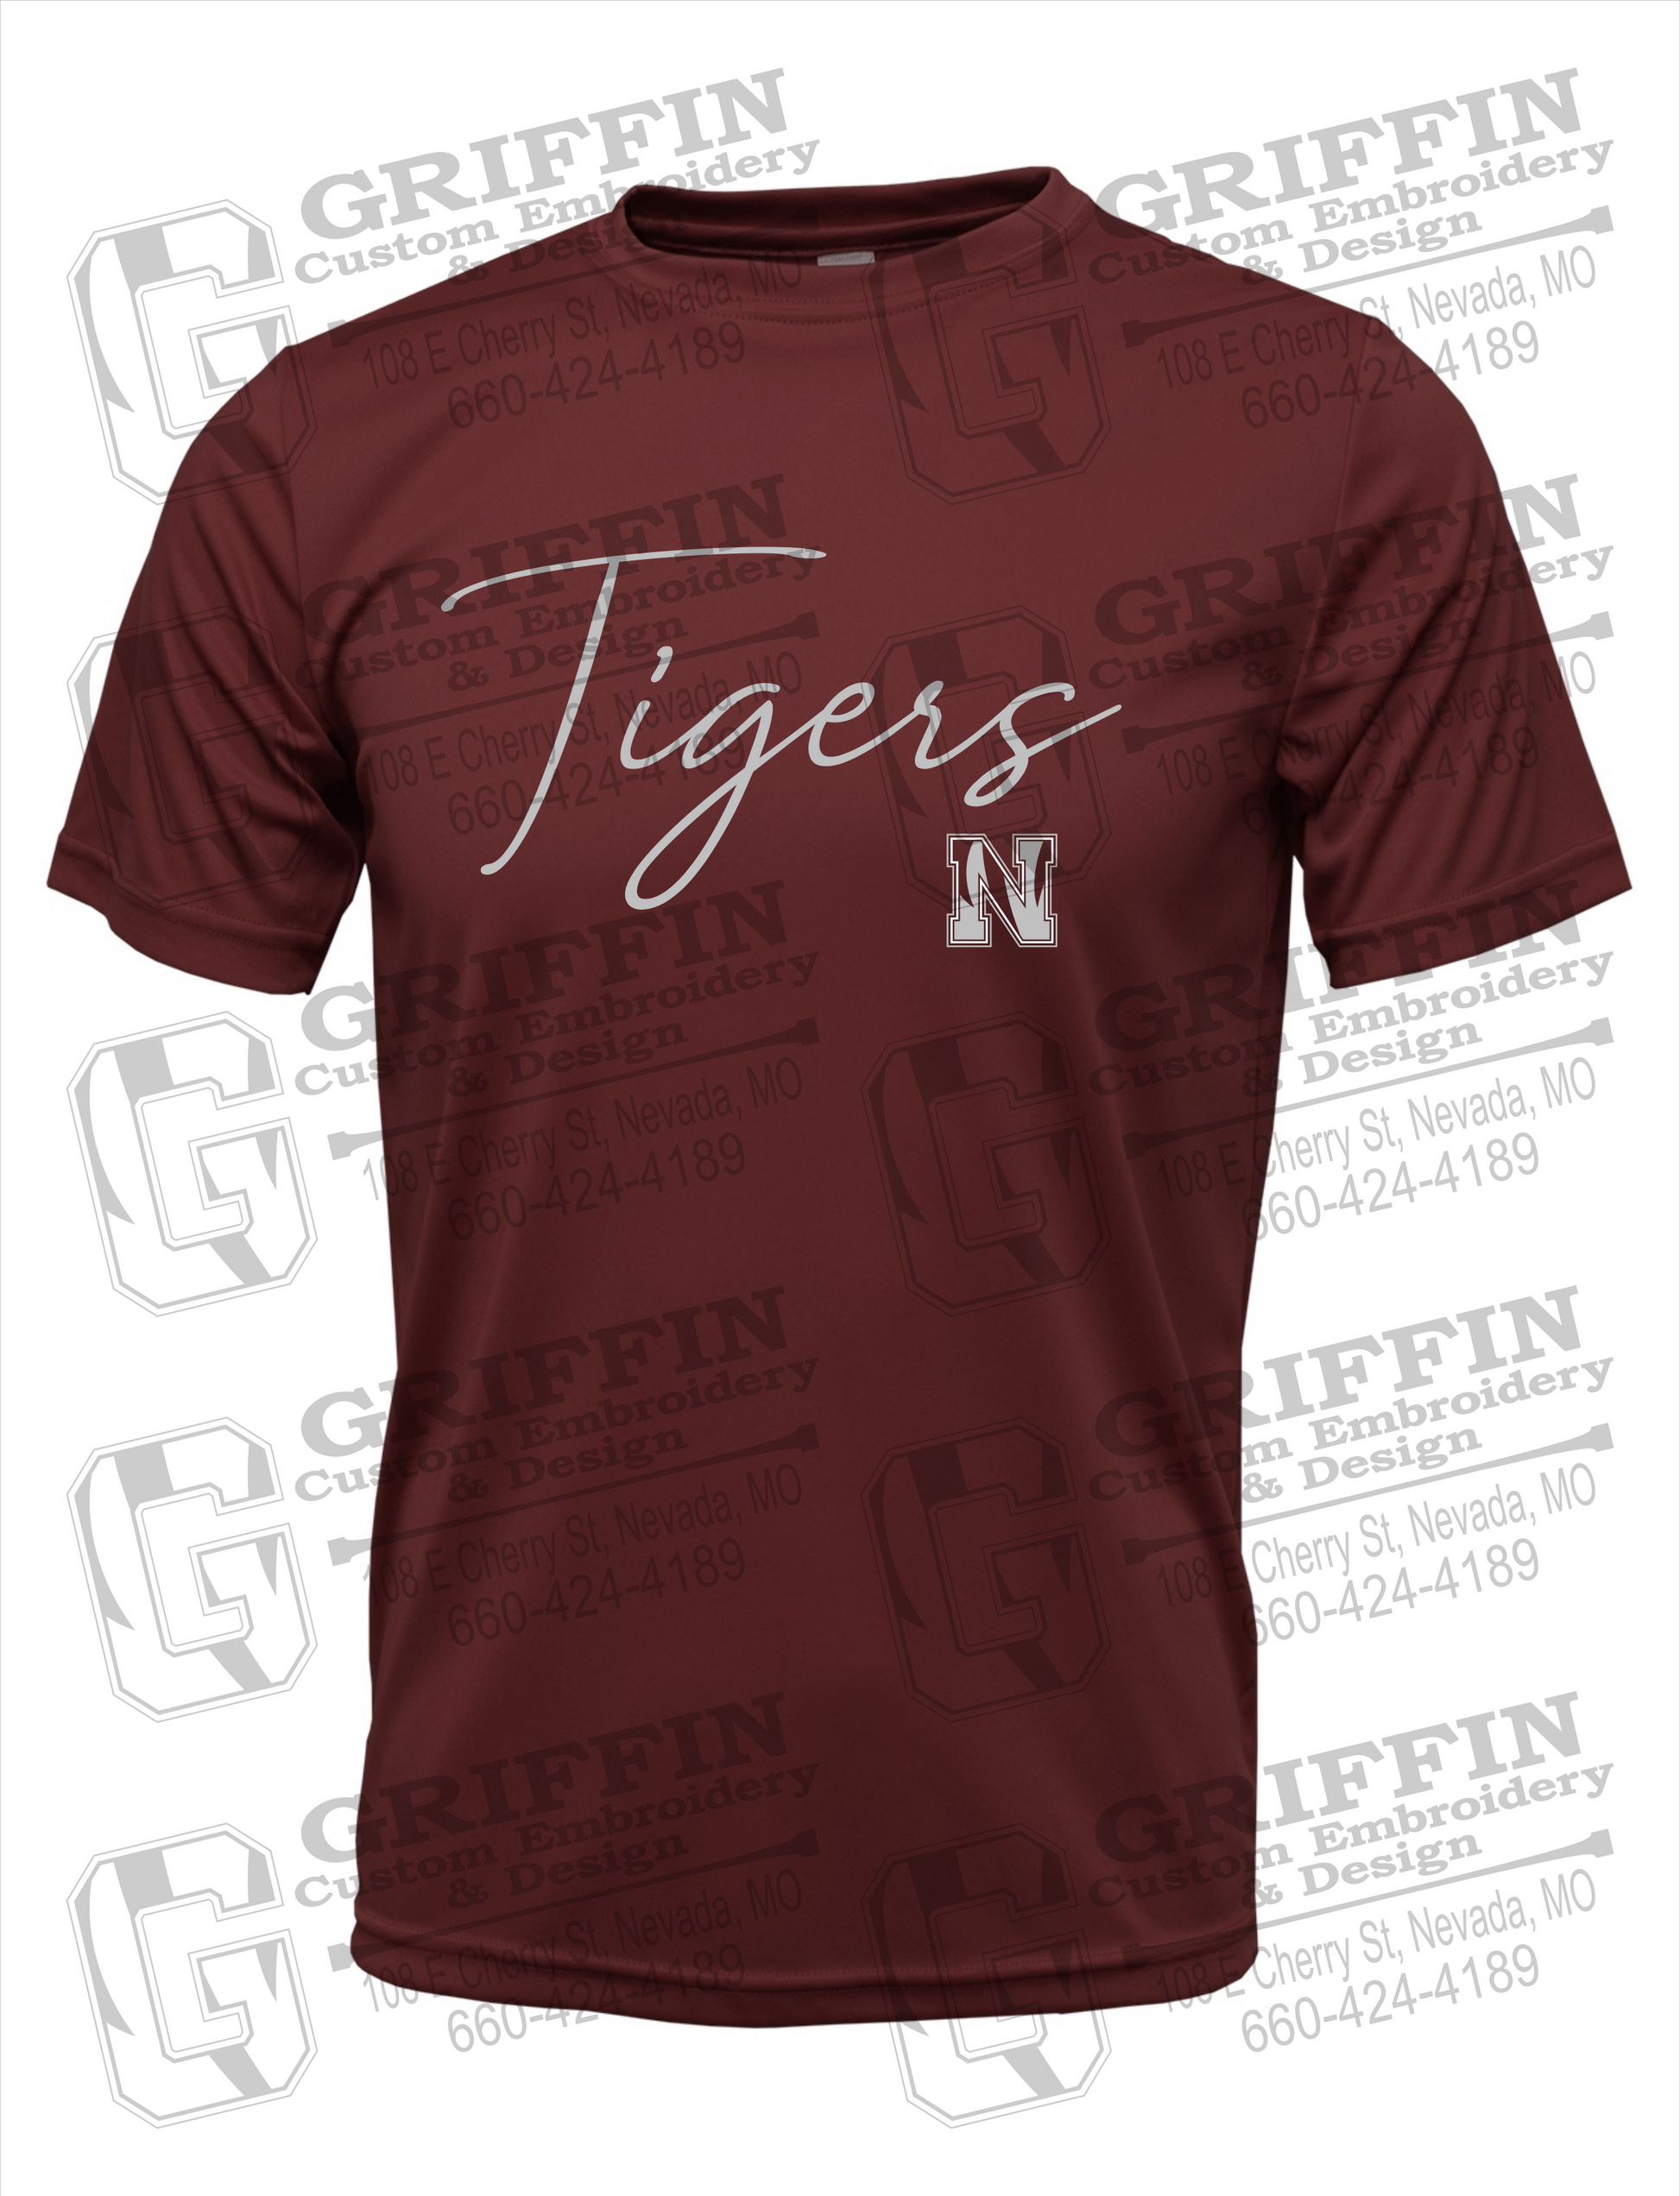 Nevada Tigers 23-A Dry-Fit T-Shirt – Griffin Custom Design